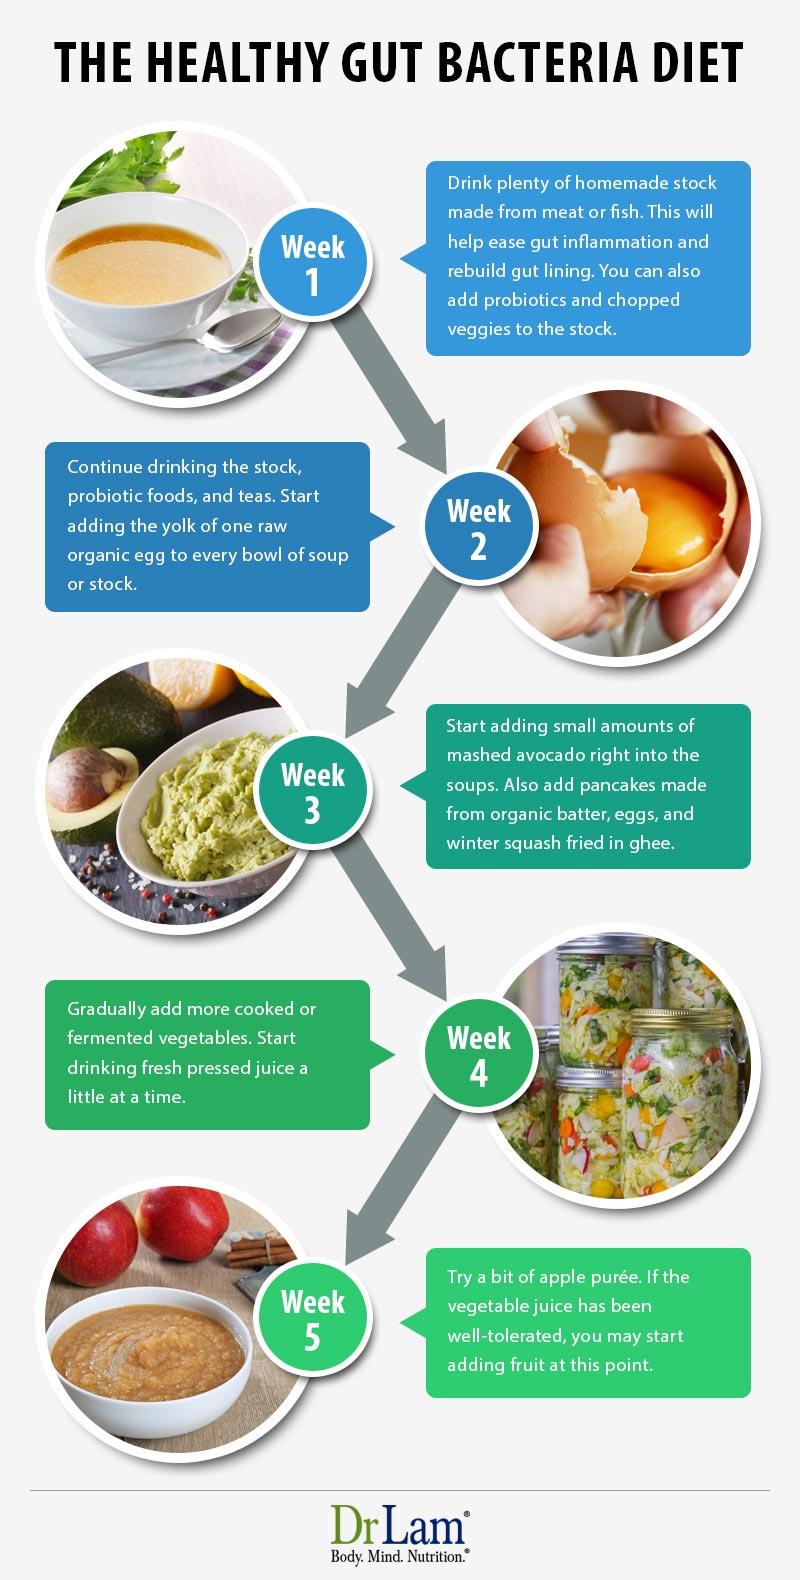 Check out this easy to understand infographic about the healthy gut bacteria diet